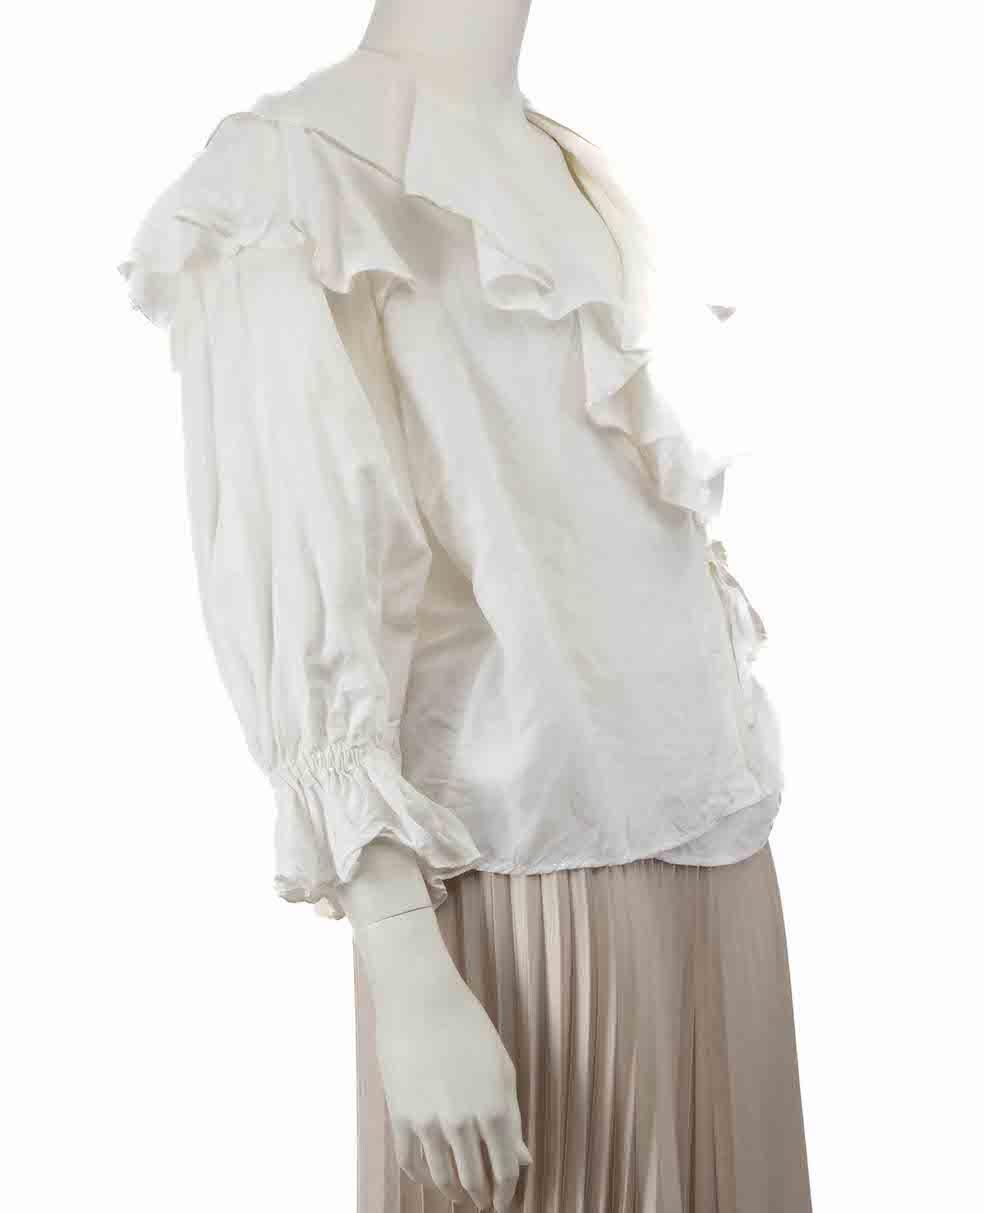 CONDITION is Very good. Minimal wear to blouse is evident. Minimal discolouration to internal neckline and internal underarms. A tiny stain is visible to front hemline on this used Rejina Pyo designer resale item.
 
 Details
 White
 Viscose
 Wrap